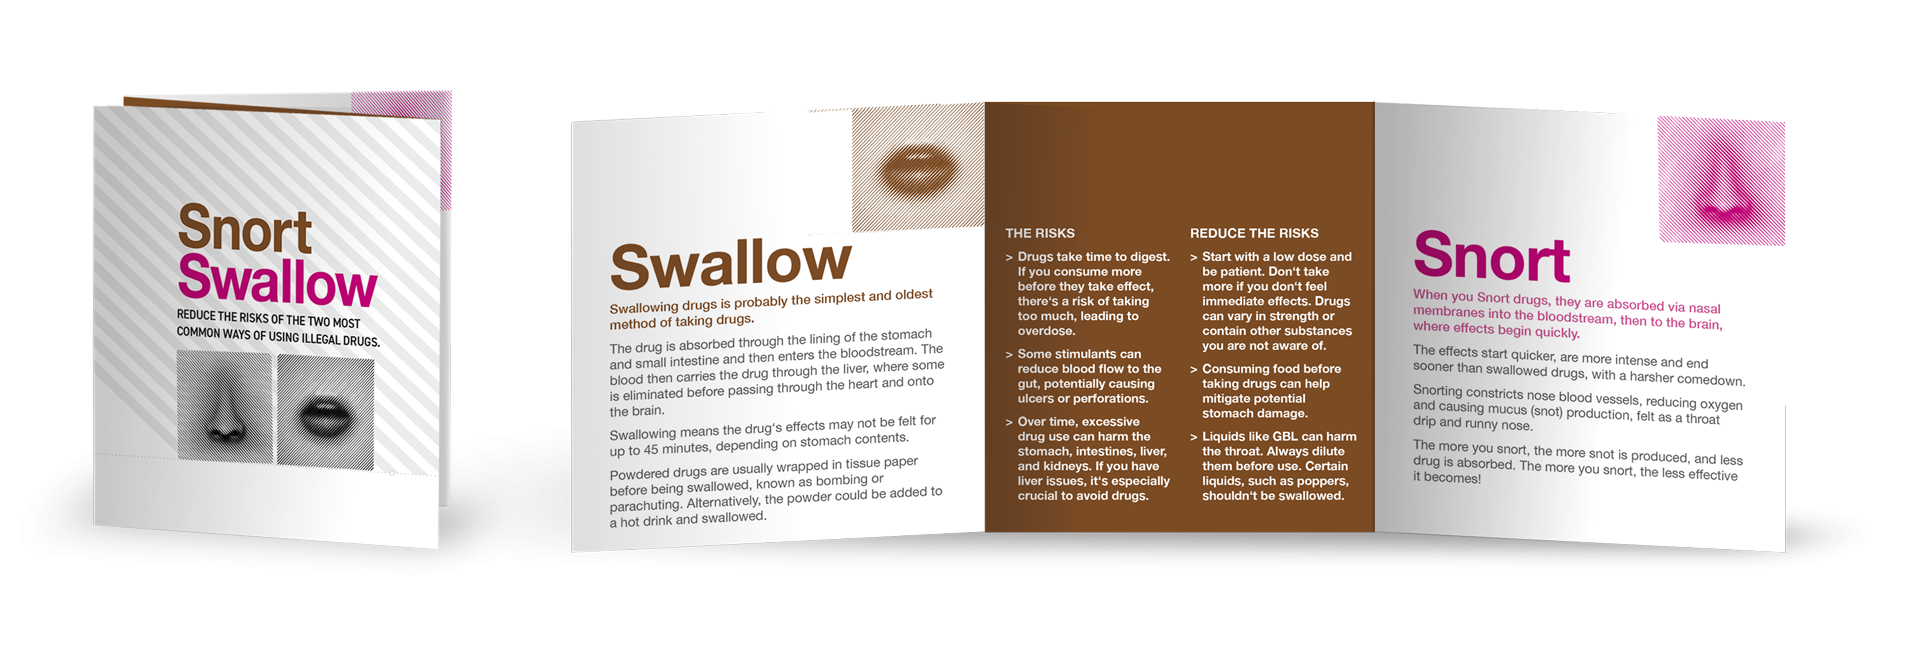 Cover and inside pages of a substance misuse harm reduction leaflet about snorting and swallowing illegal drugs